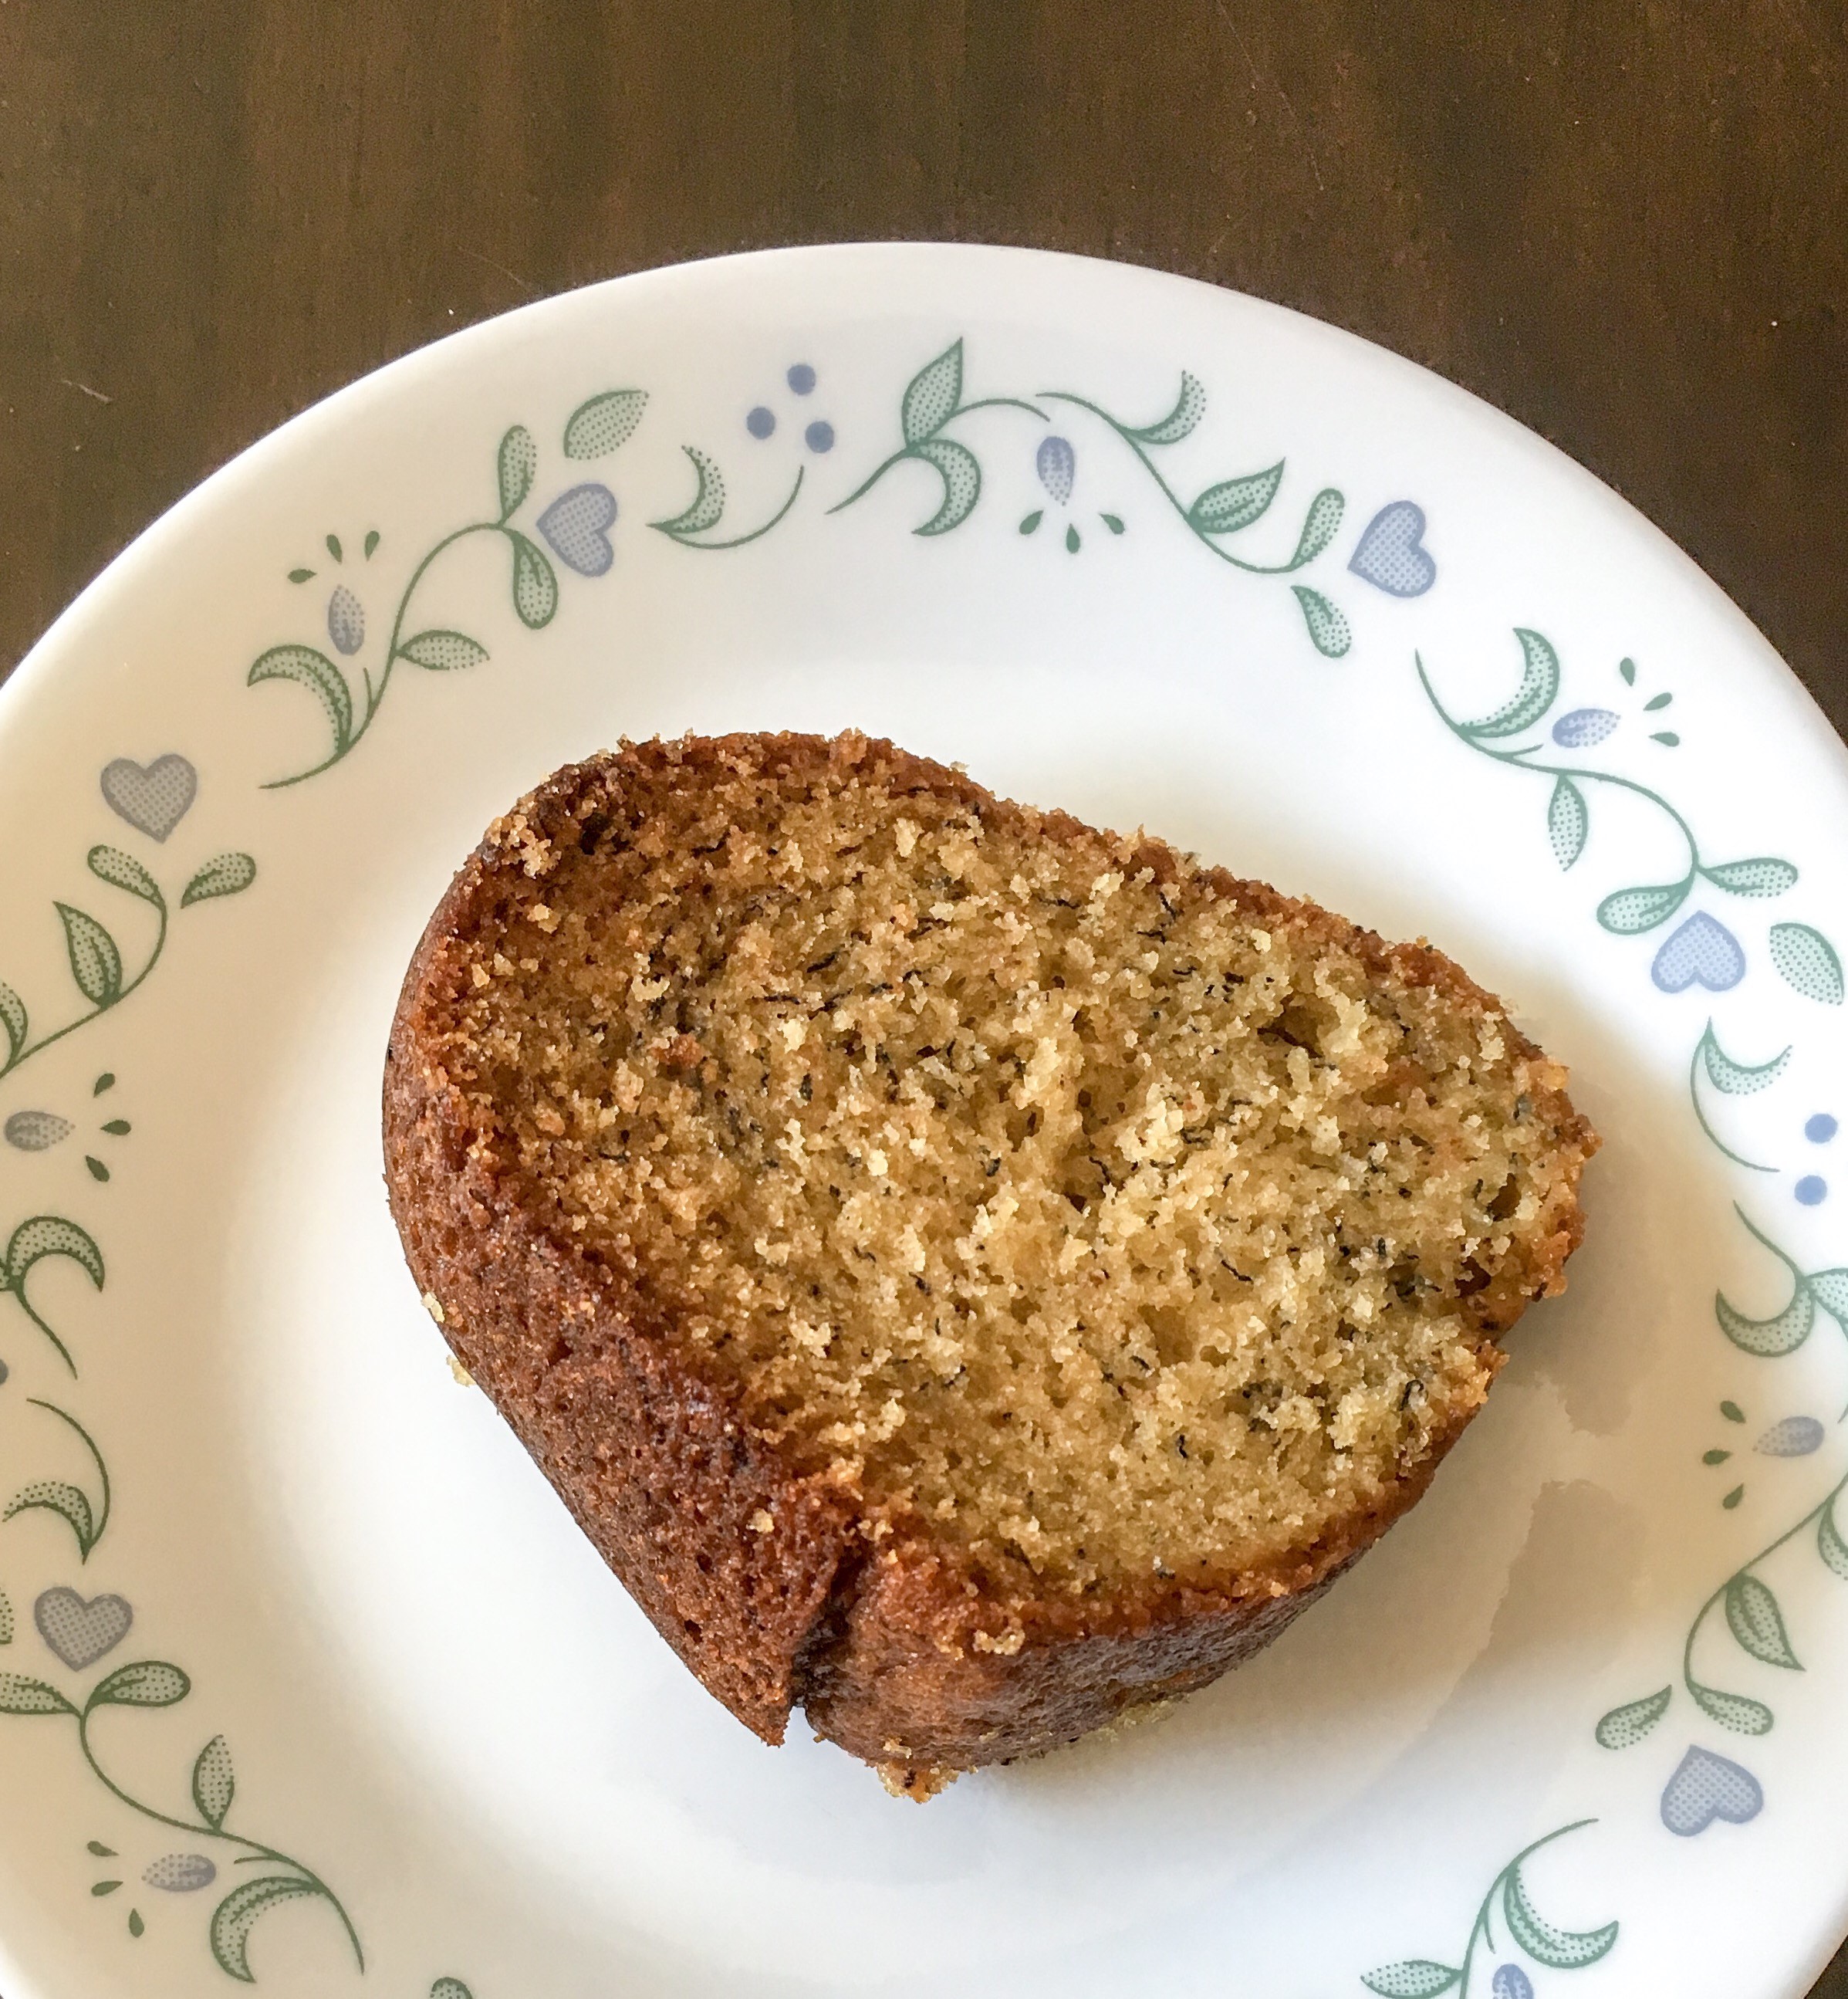 A slice of Nut free banana bread with chocolate chips